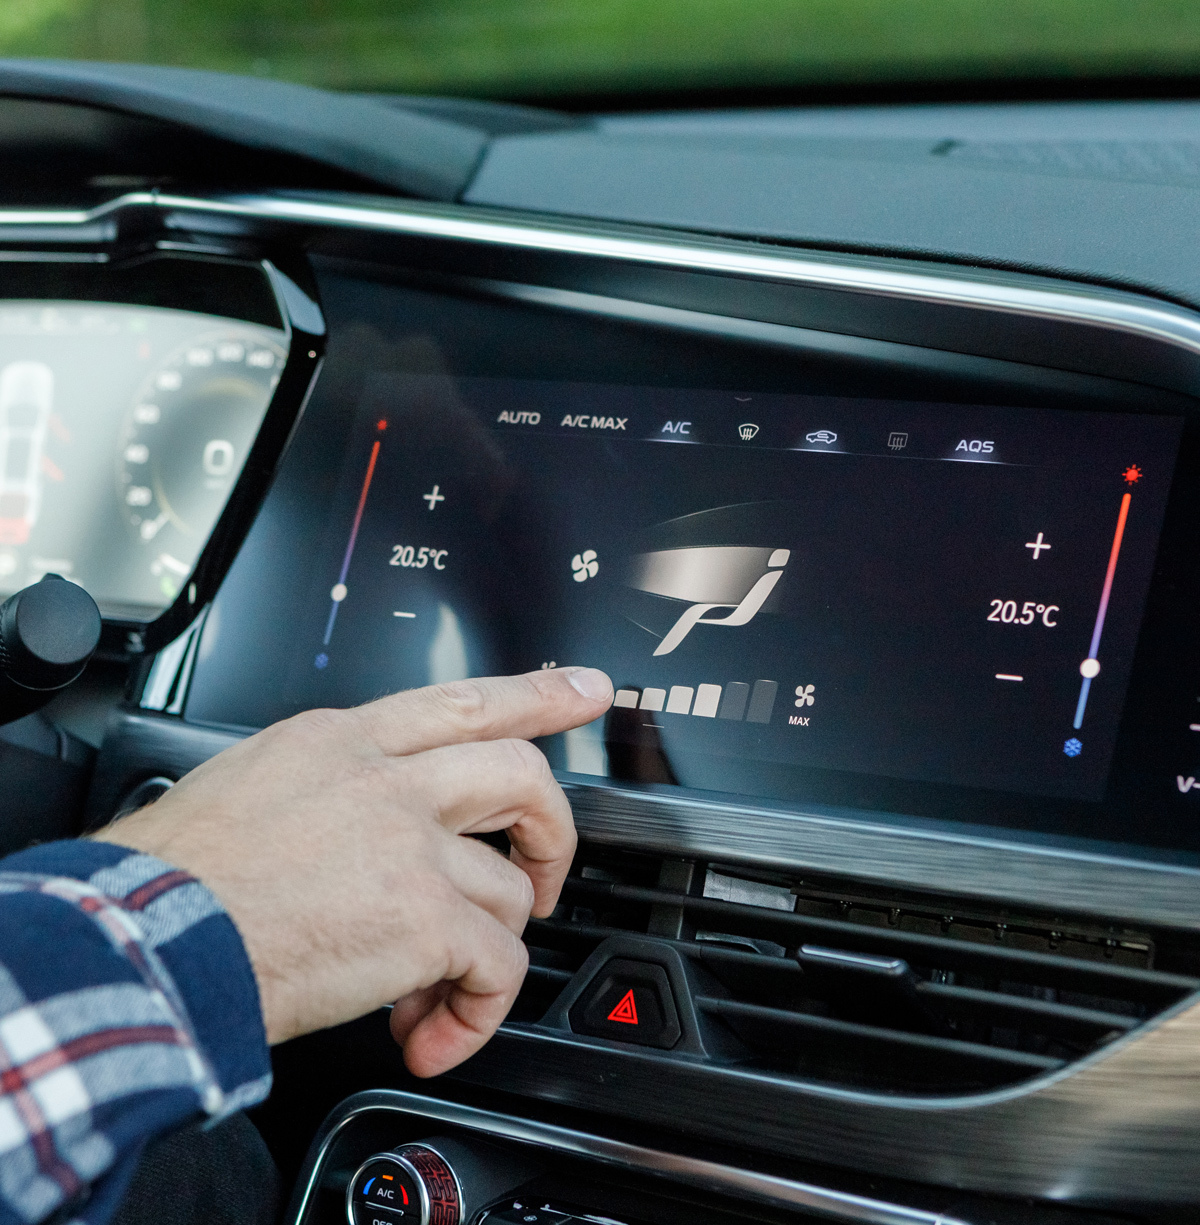 capacitive touch screen on vehicle